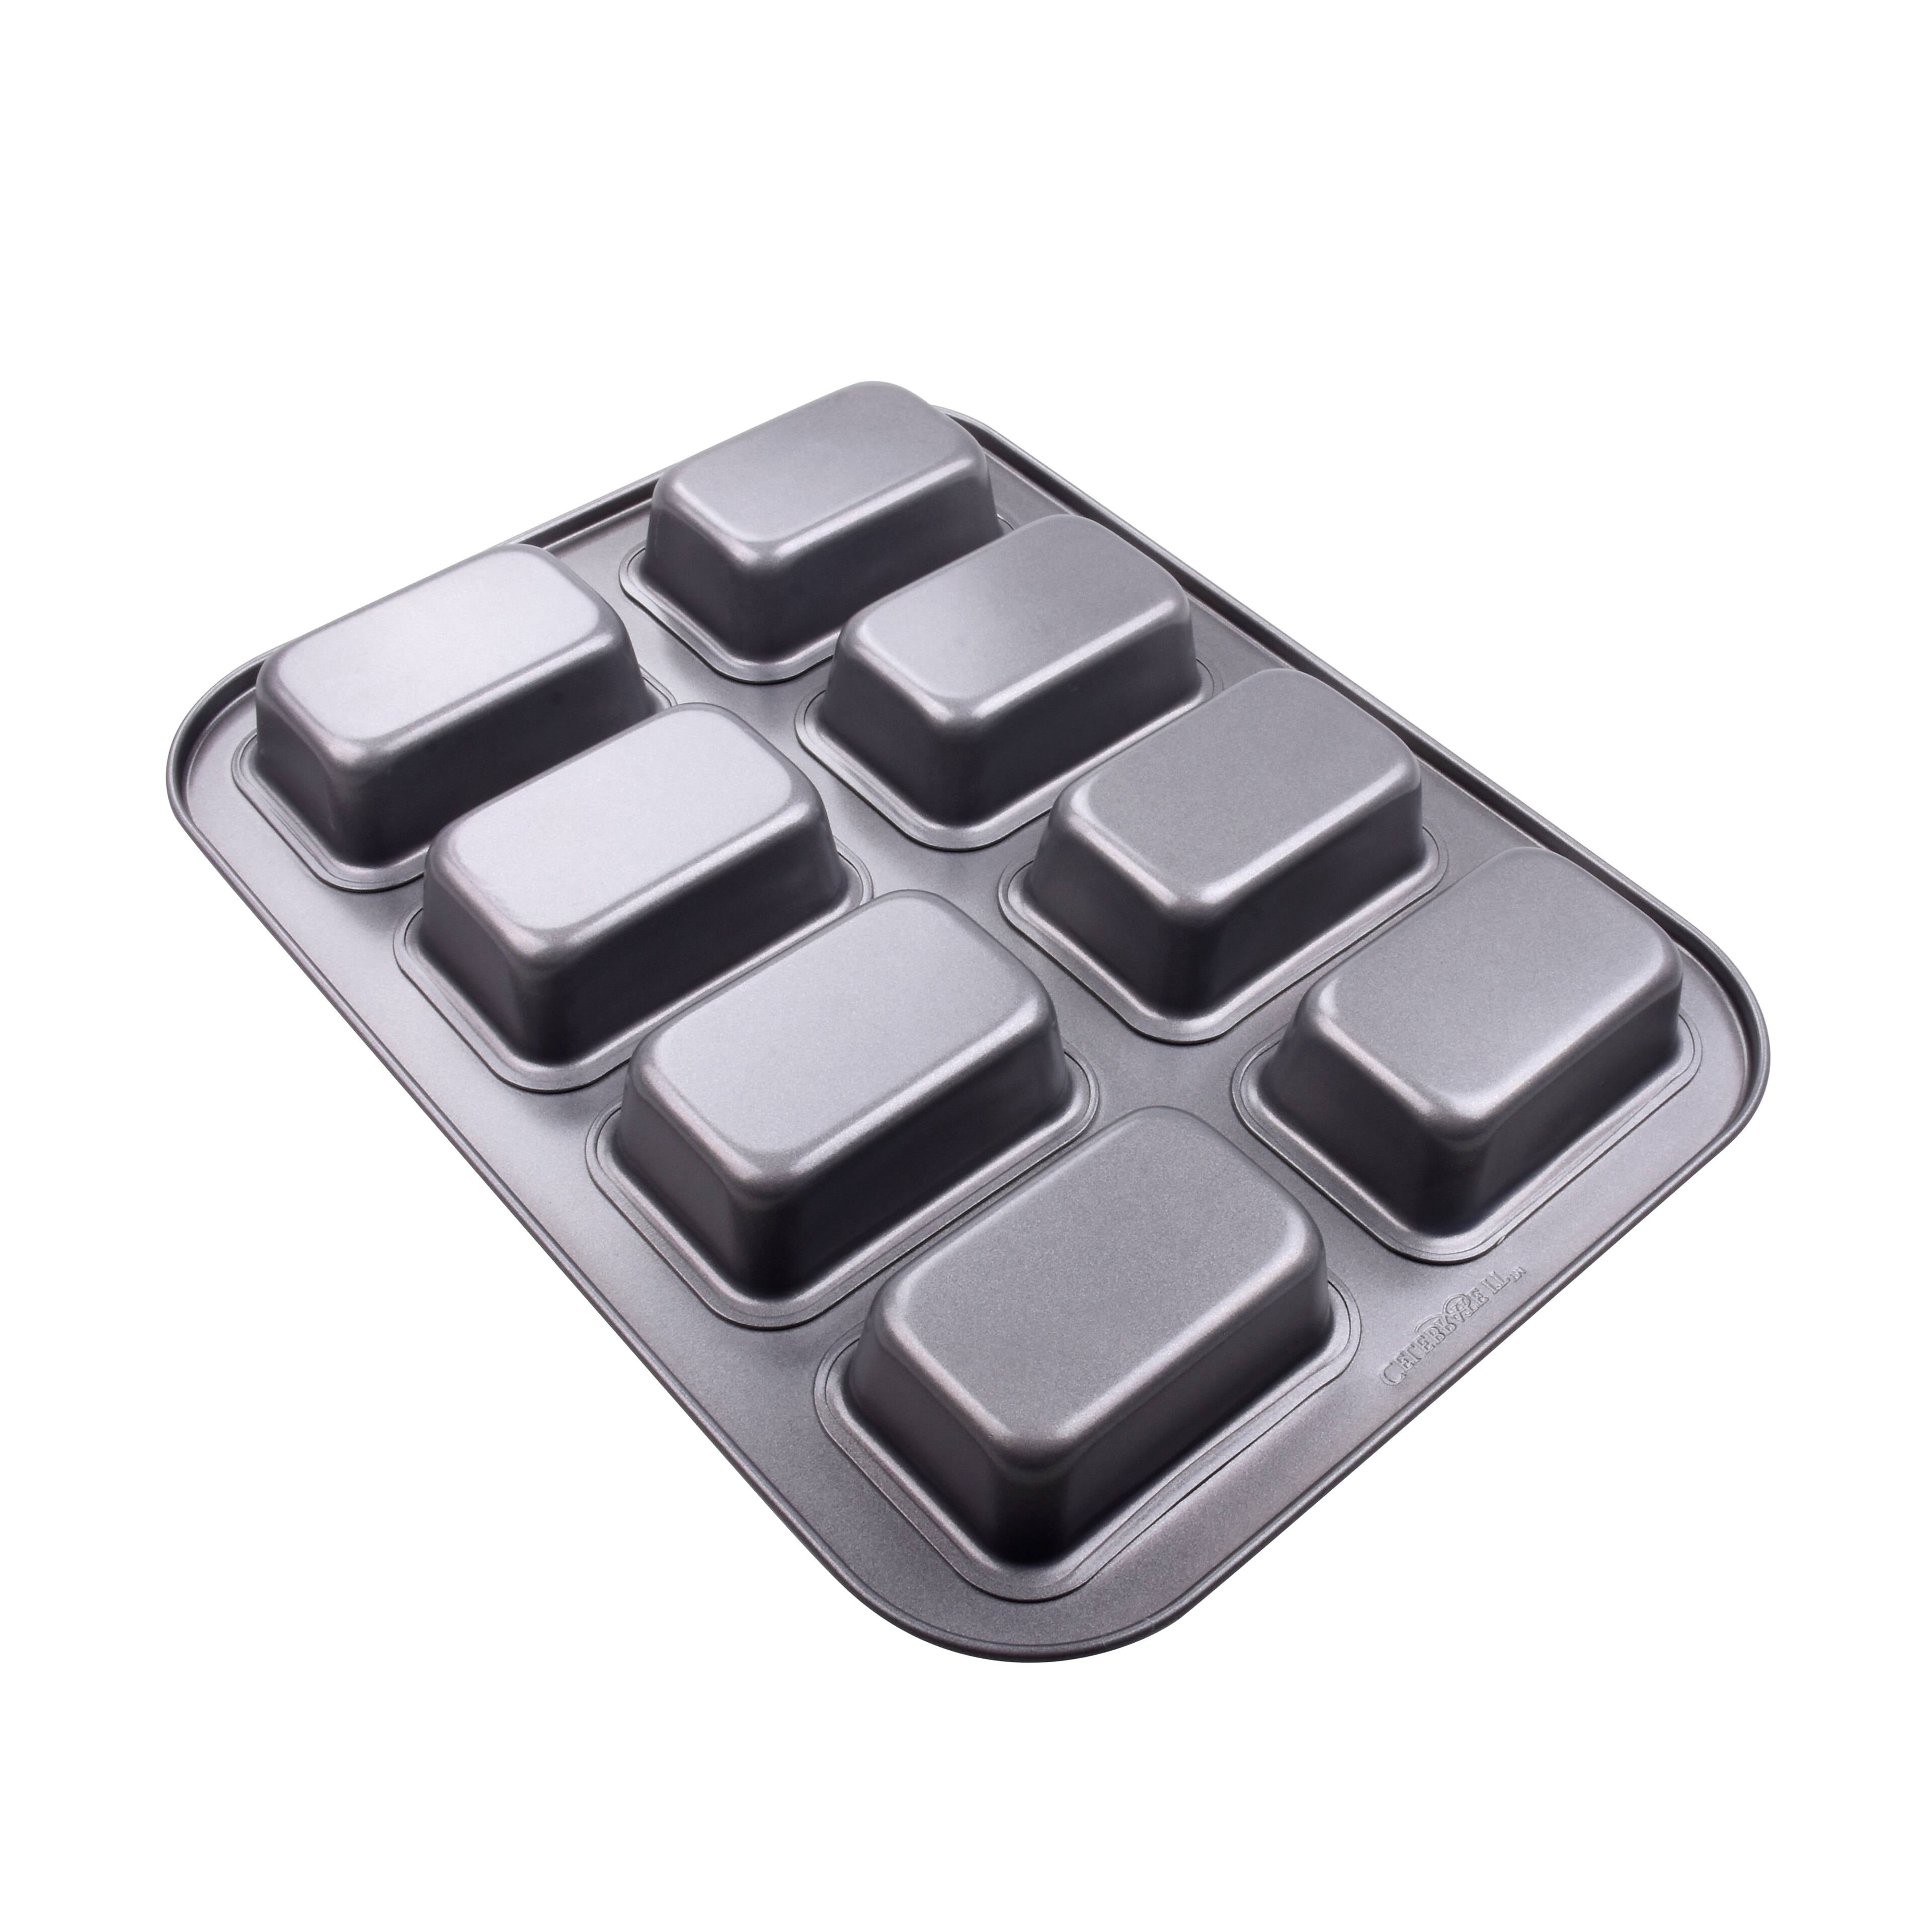  Wilton Perfect Results Non-Stick Mini Loaf Pan, 8-Cavity, 15.2  IN x 9.5 IN x 1.6, Gray: Home & Kitchen